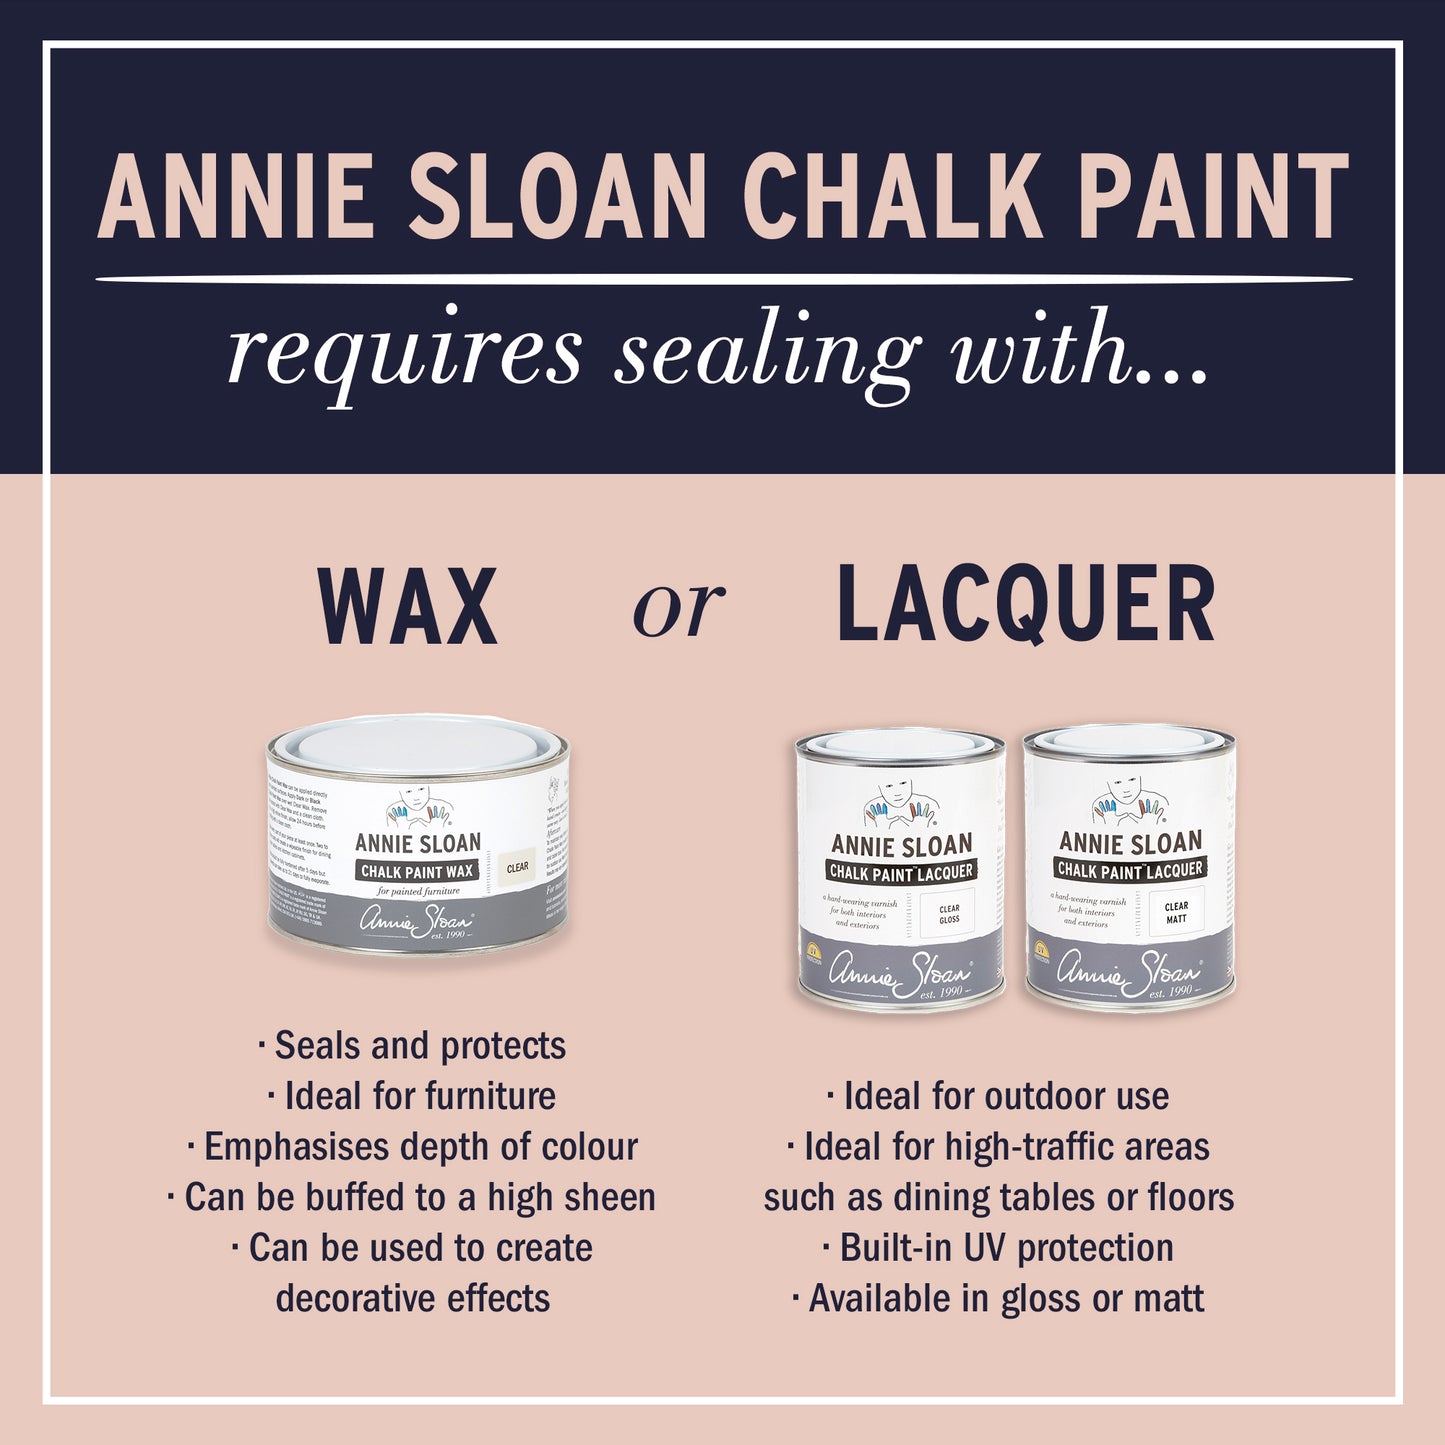 Annie Sloan Chalk Paint® - Chateau Grey - The 3 Painted Pugs